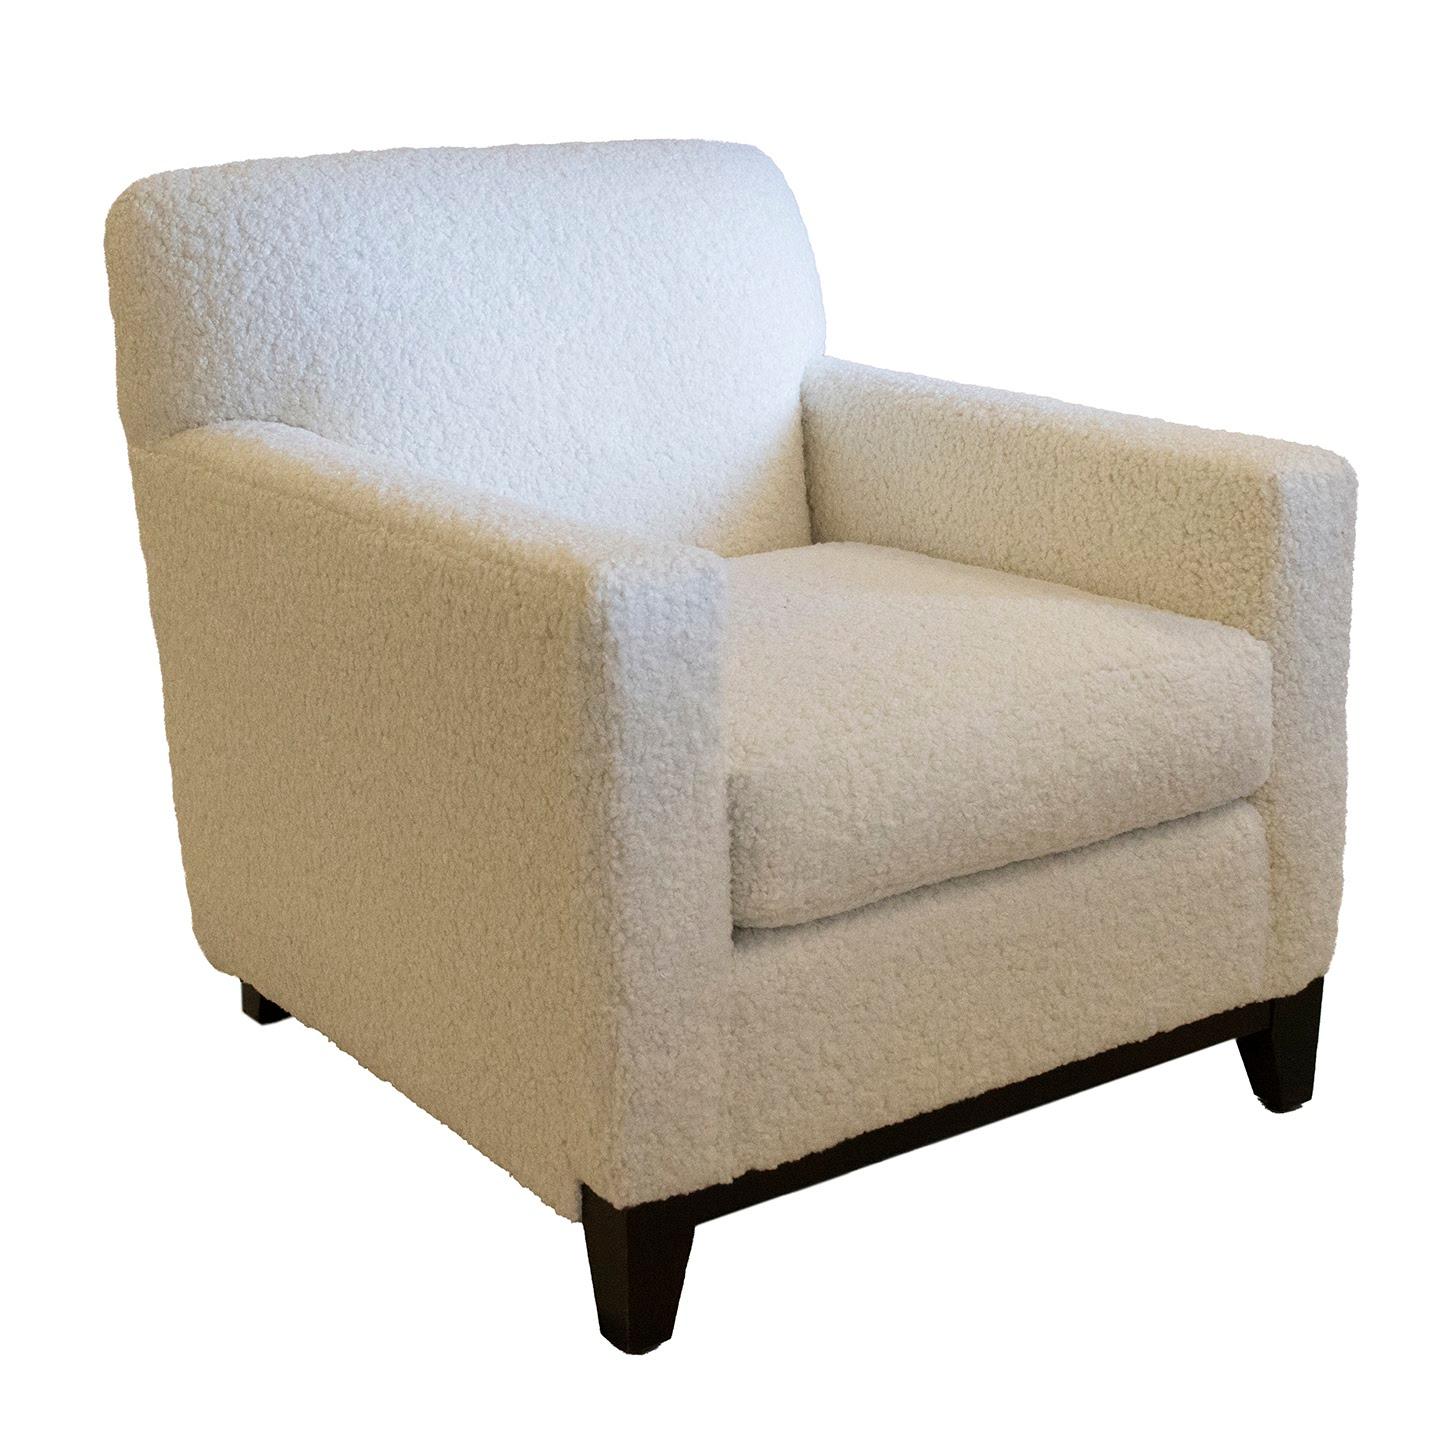 Veneer Art Deco Inspired Club Chairs in Faux Shearling Boucle by Rowe